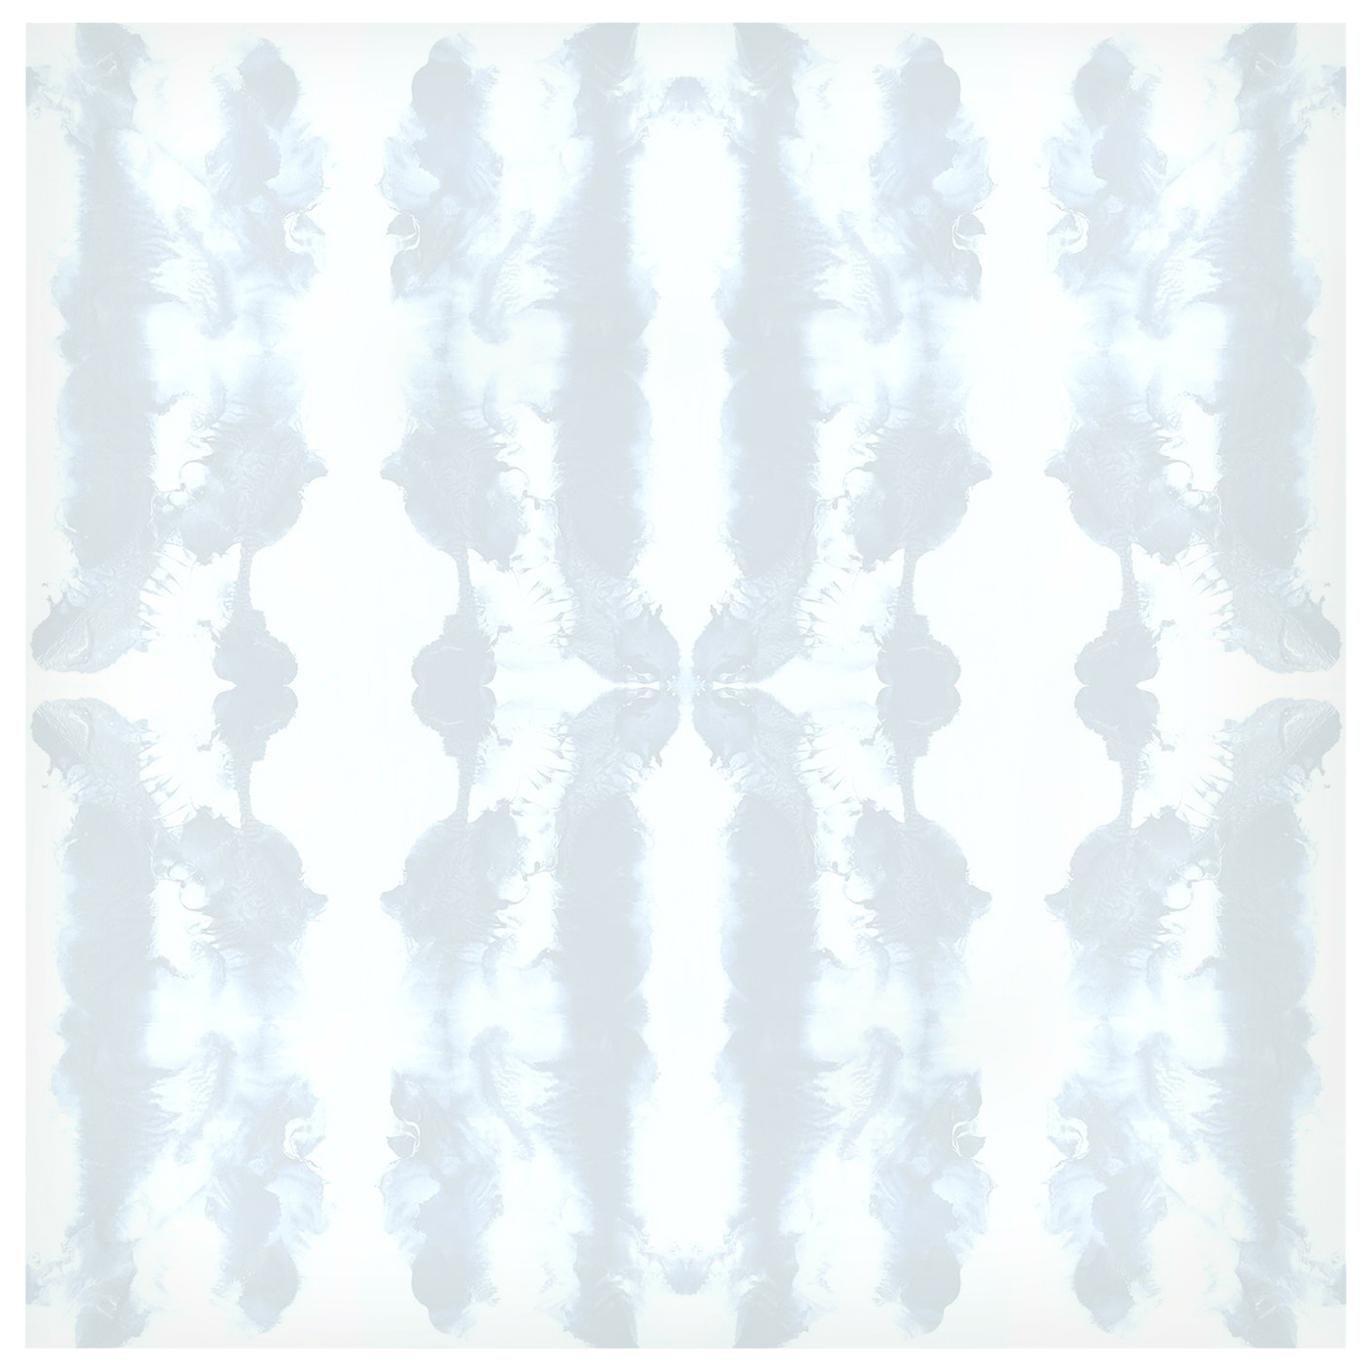 Waterstripe Wallpaper in Wisp by Gray Flores Design x Greenpoint Hill For Sale